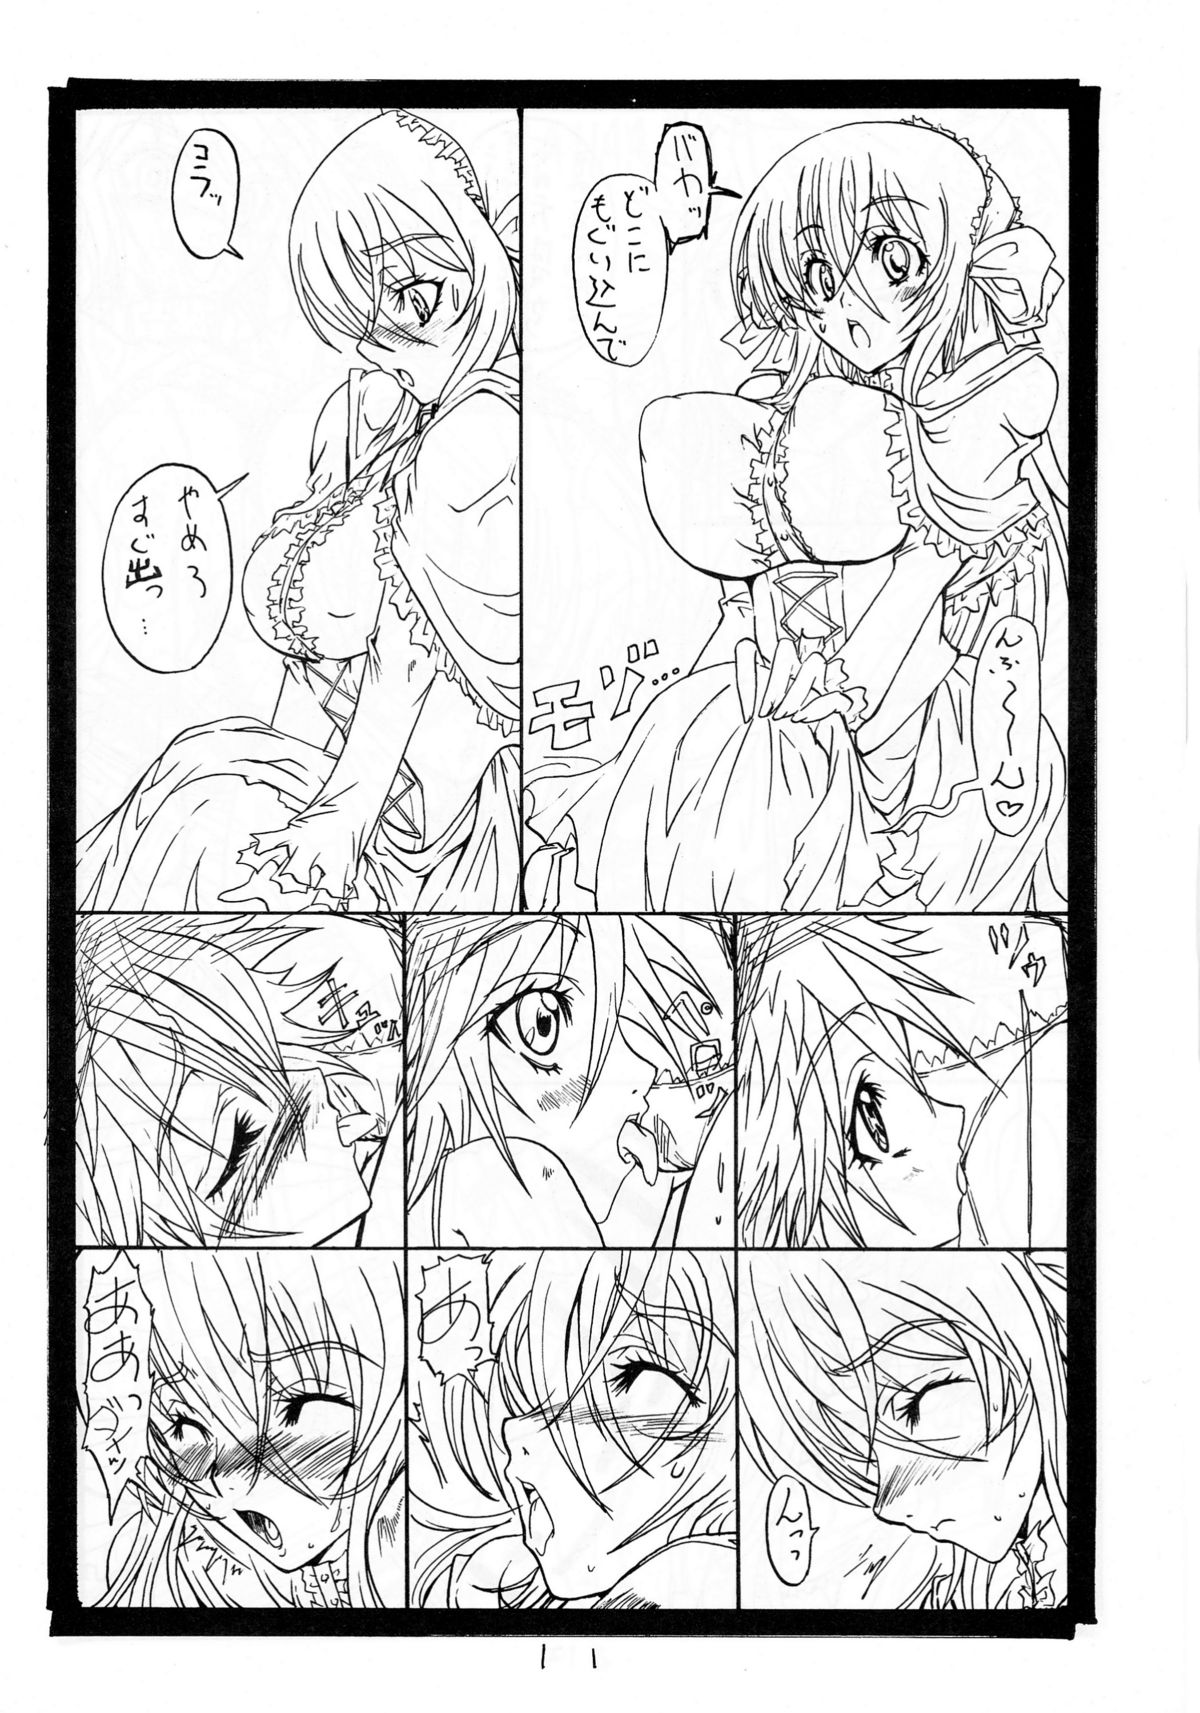 (C71) [S-G.H. (Oona Mitsutoshi)] SUICIDA DESESPERACION (Coyote Ragtime Show) page 11 full